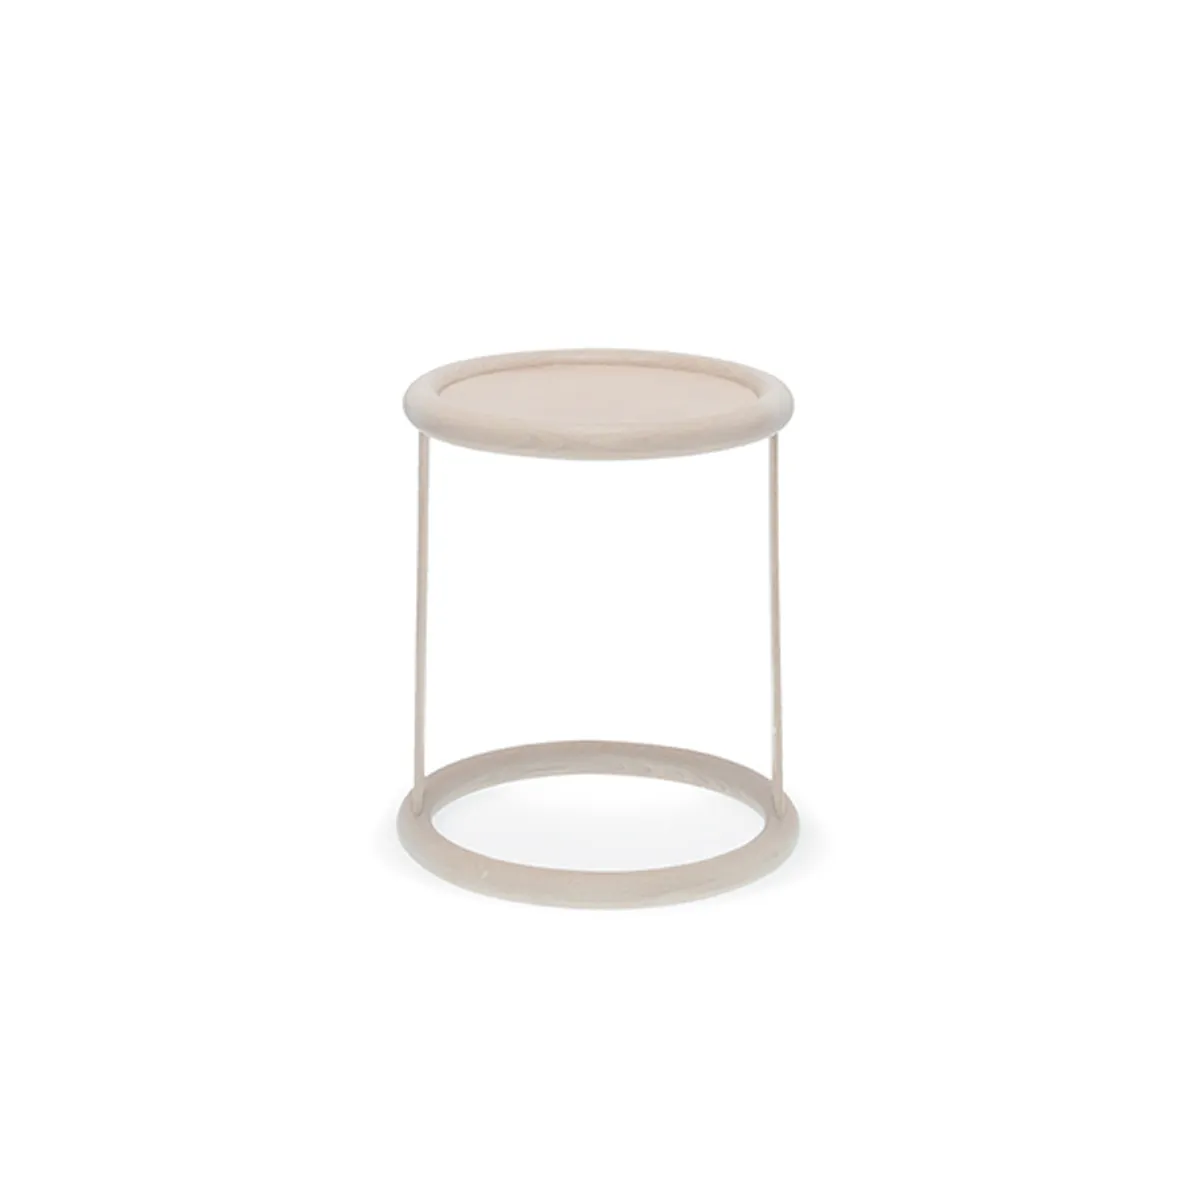 Bakerloo Side Table Contemporary Hotel Furniture By Insideoutcontracts